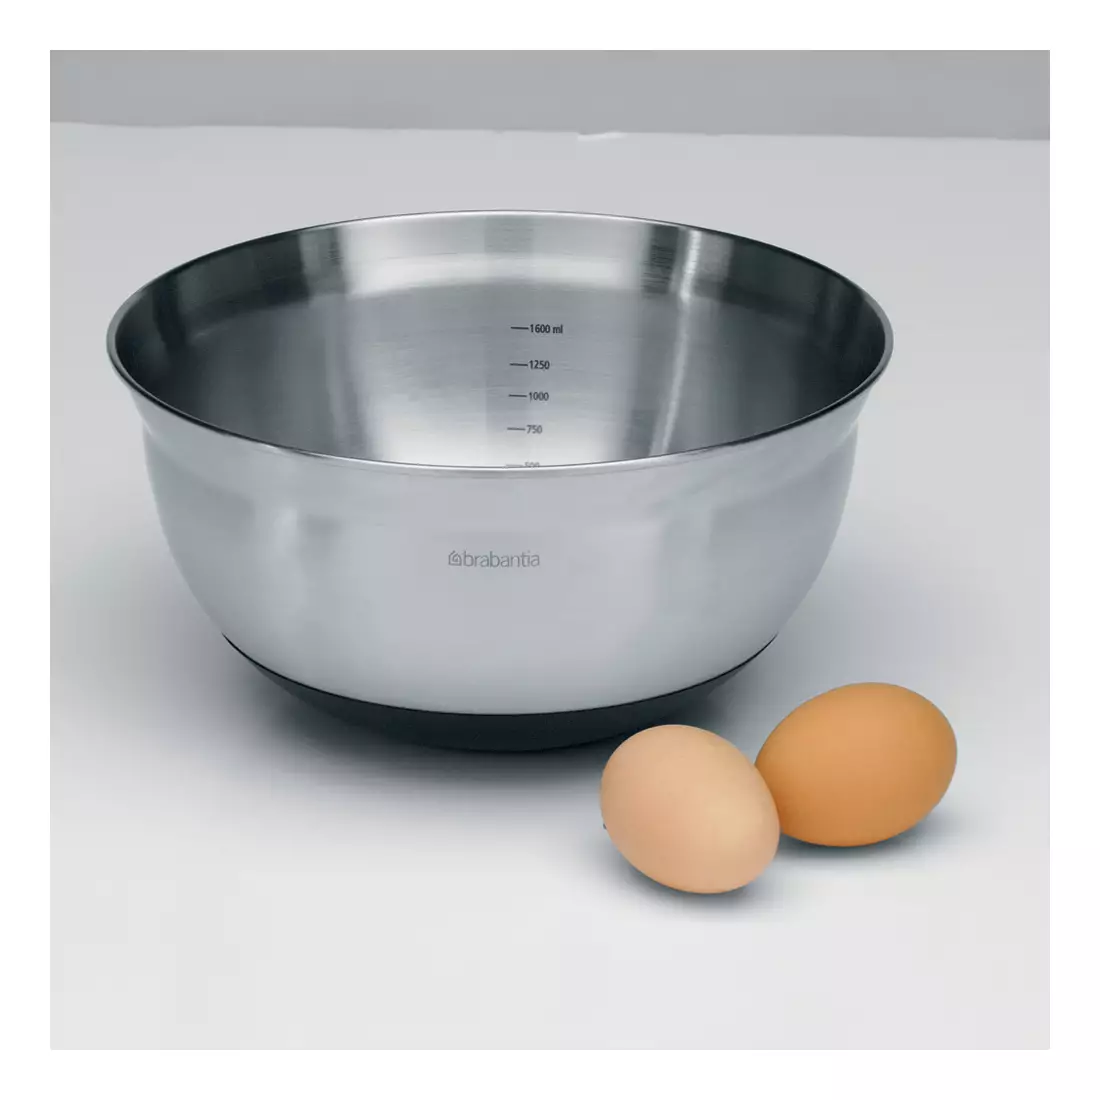 BRABANTIA kitchen bowl with measuring cup 1.6L, stainless steel